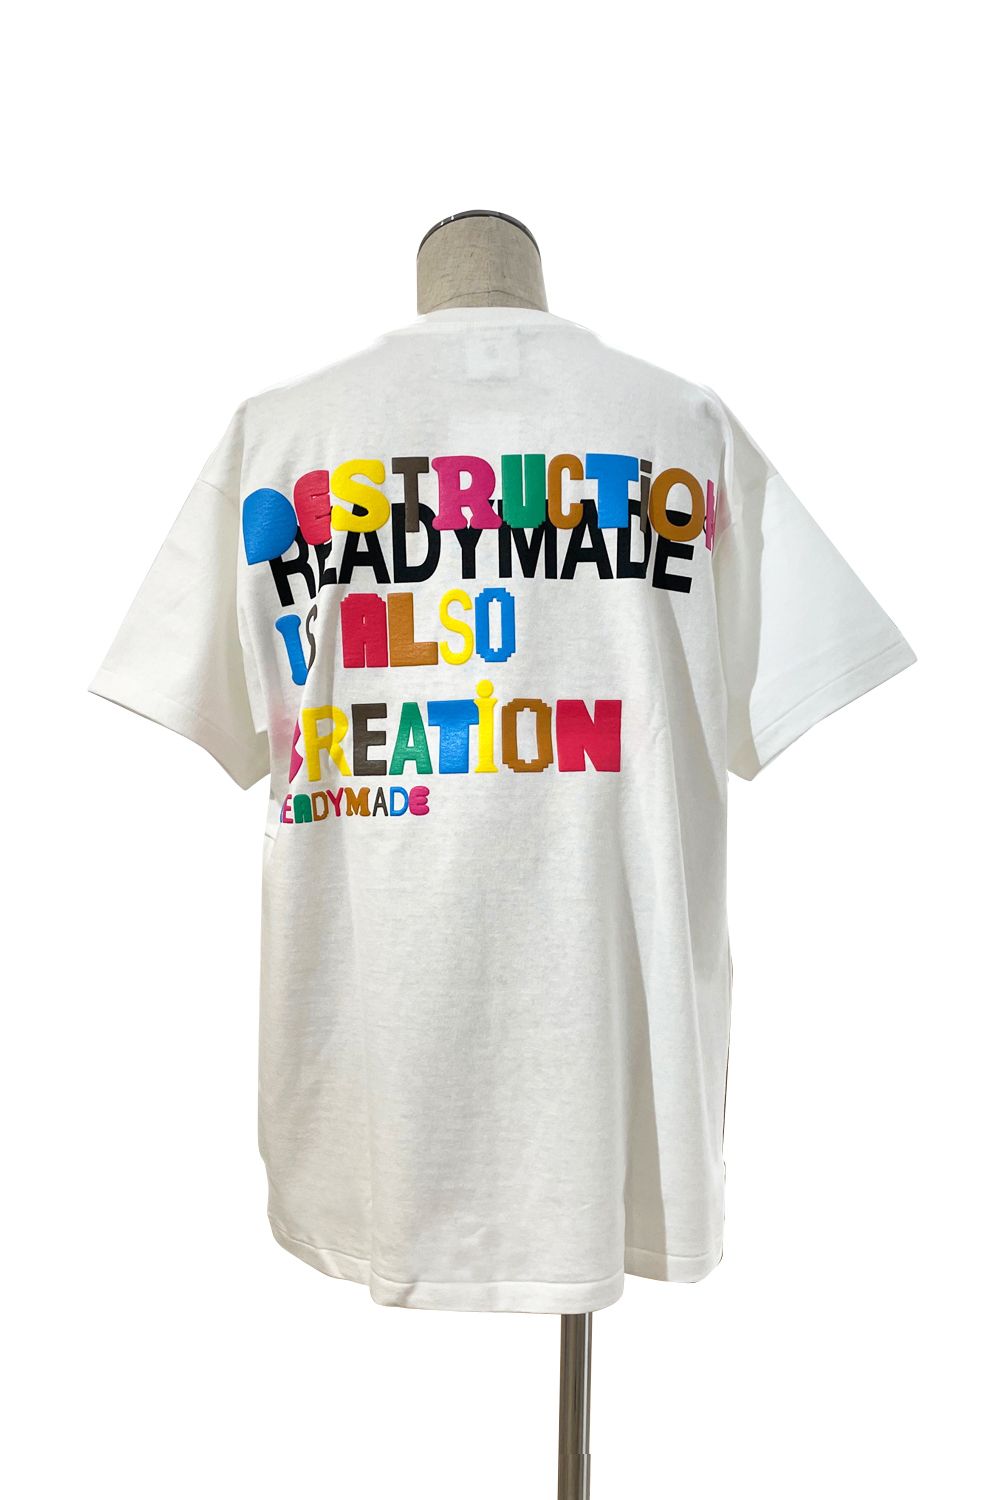 SS21 READYMADE COLLAPSED FACE T-SHIRT530cm身幅